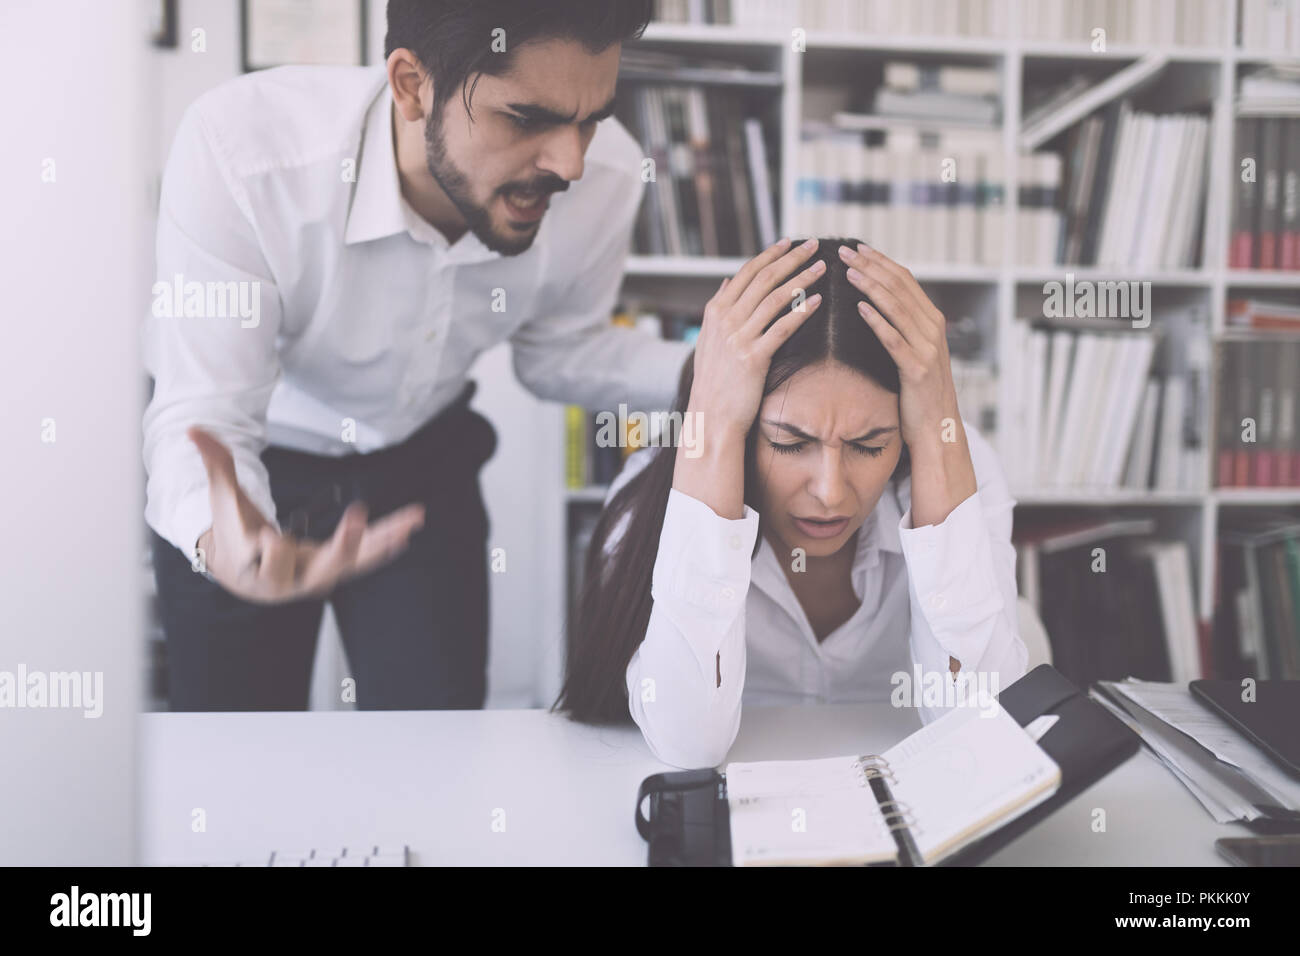 Businessman yelling at female colleague in office Stock Photo